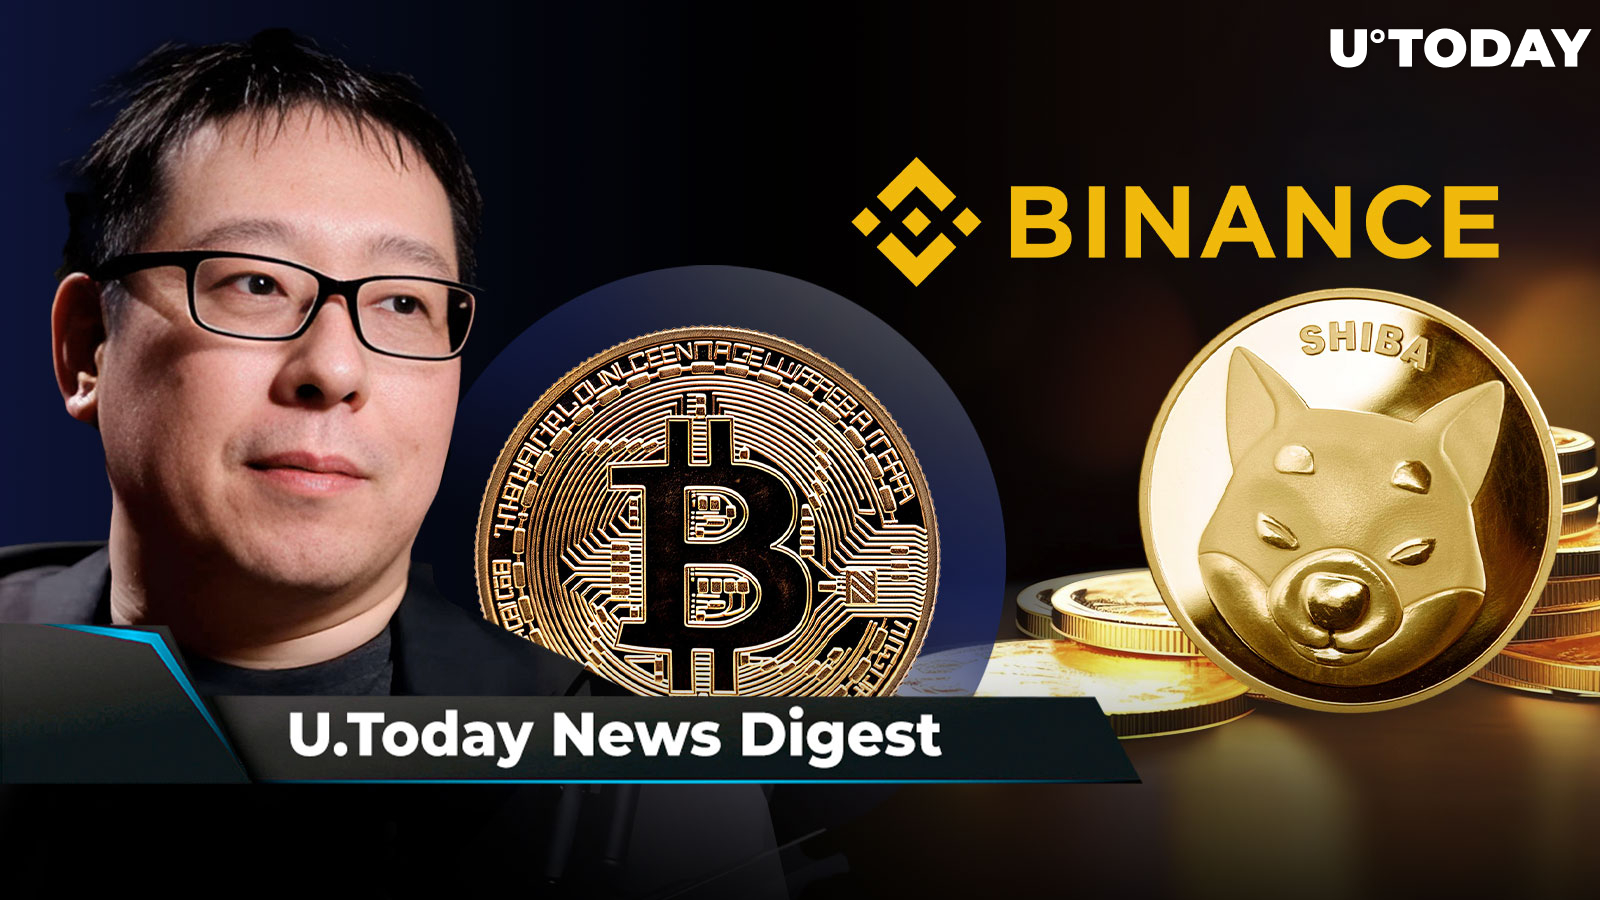 SHIB Holders Can Claim $500,000 Crypto Airdrop from Binance, DOGE Founder Unveils His BTC Stash, Samson Mow Says BTC Still Targets $1 Million: Crypto News Digest by U.Today